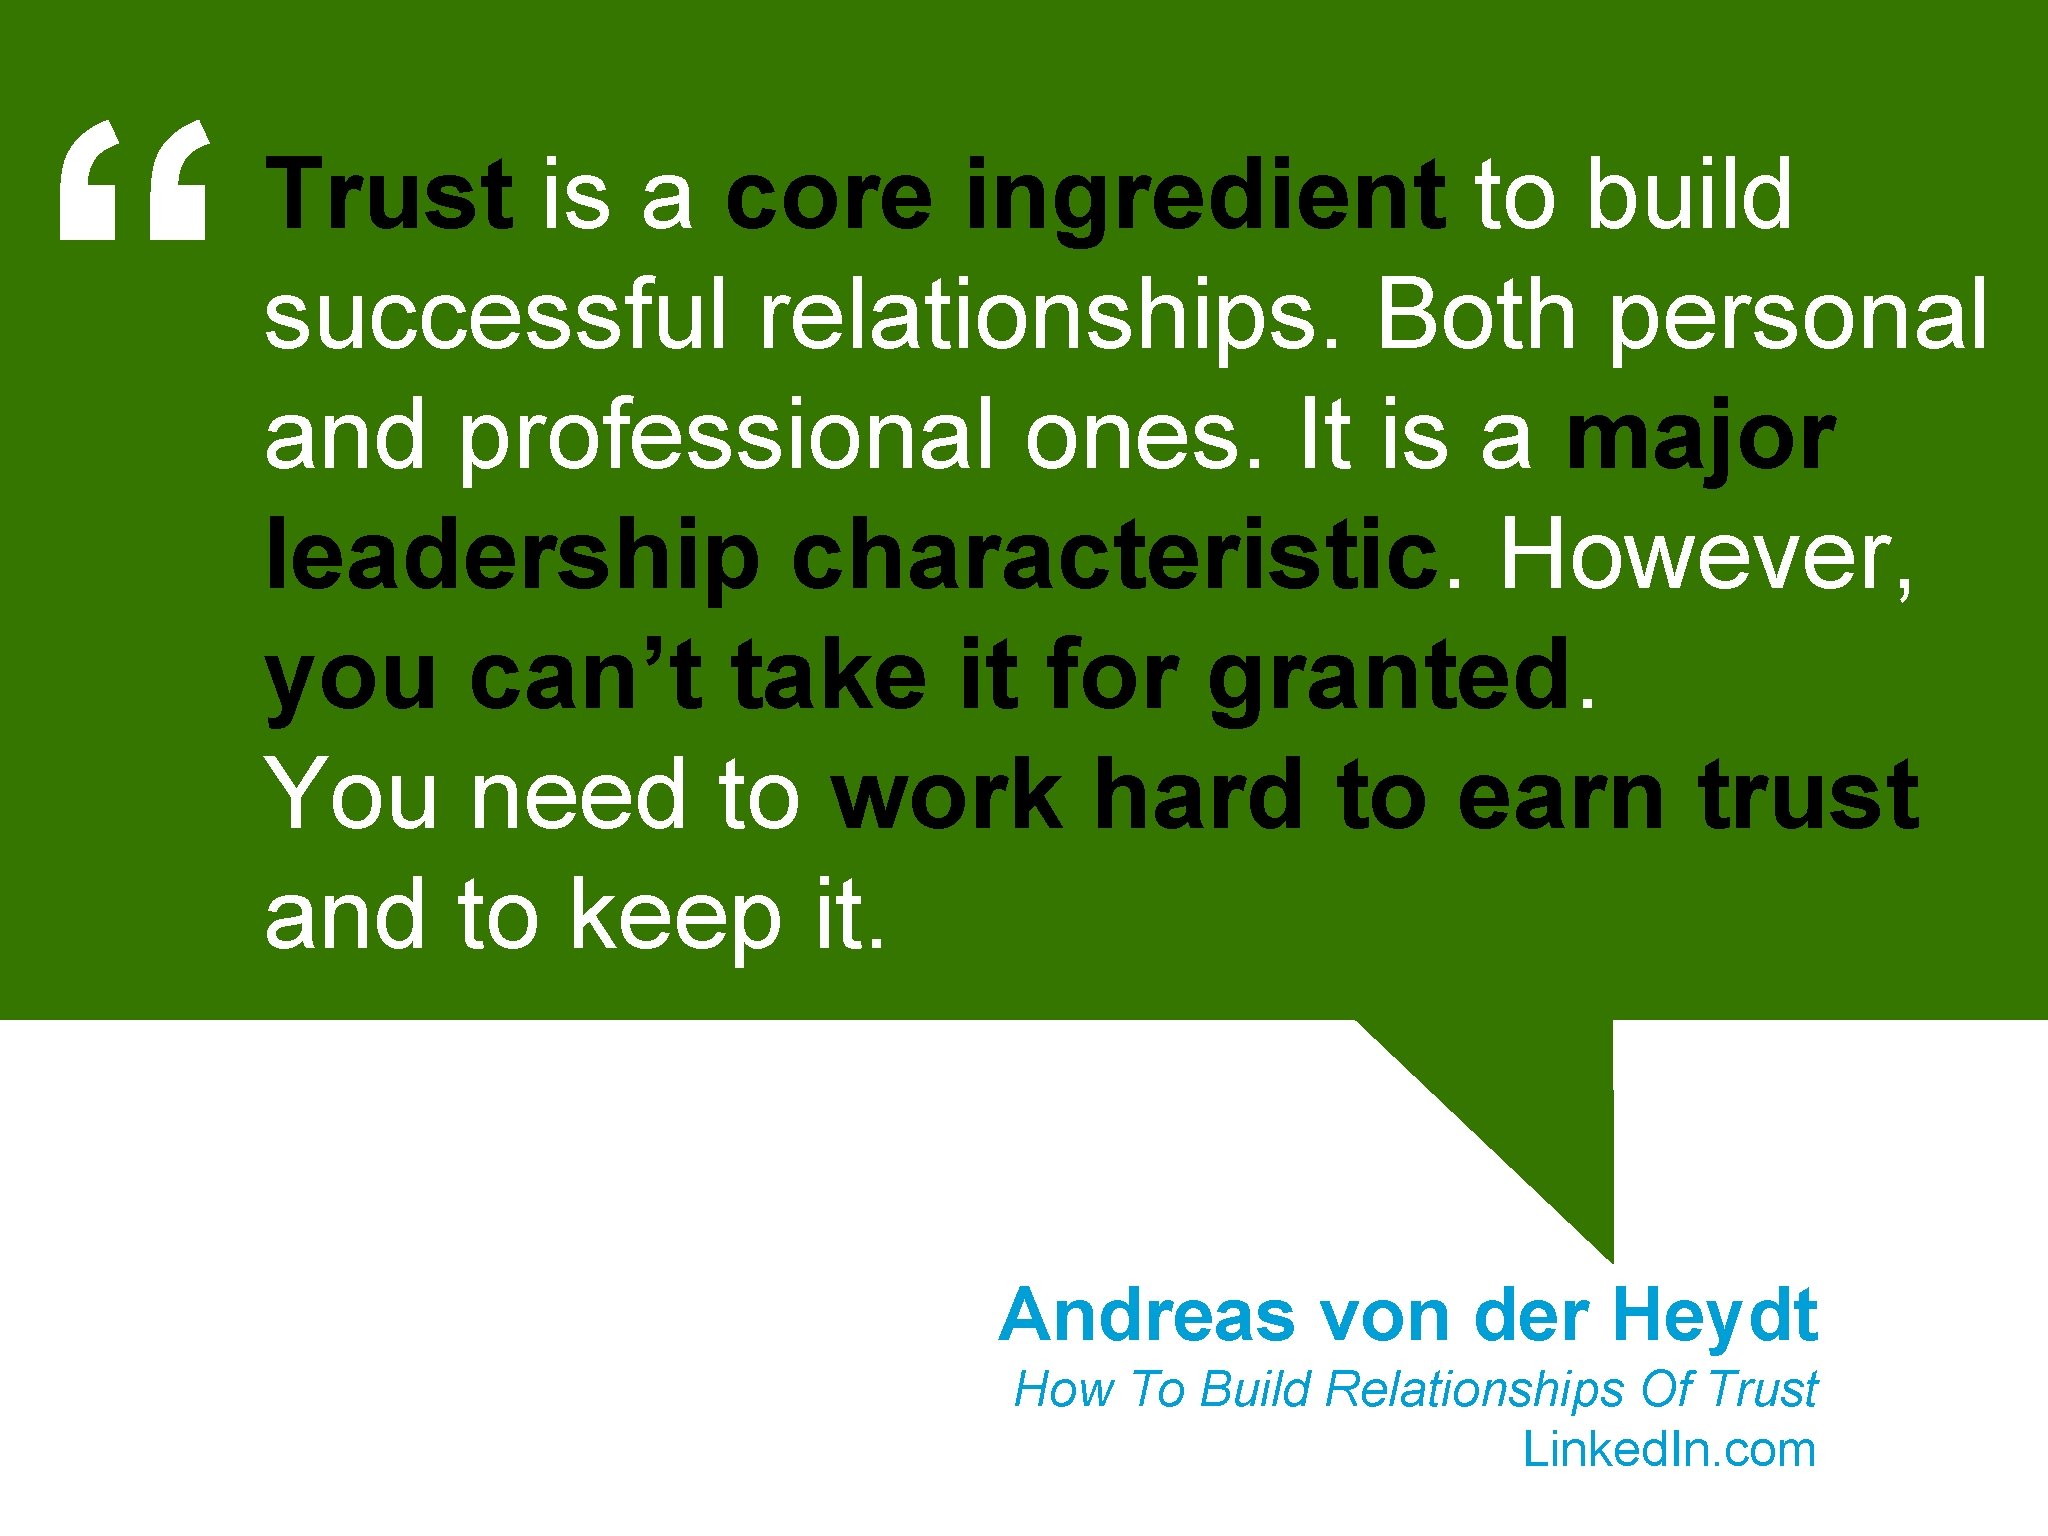 “ Trust is a core ingredient to build successful relationships. Both personal and professional